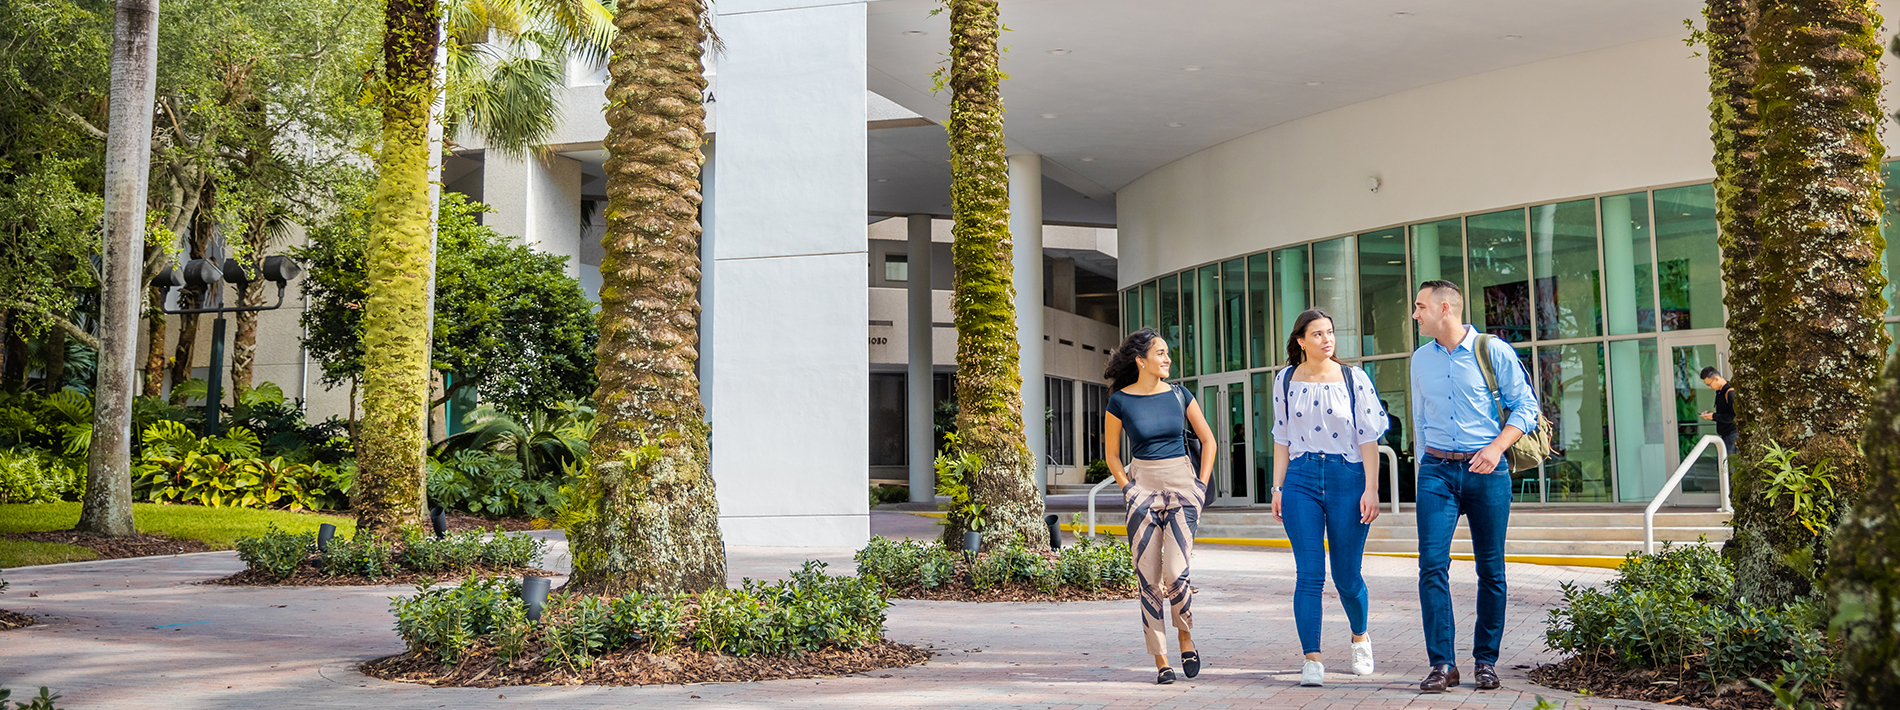 One male and two female students walk together on campus